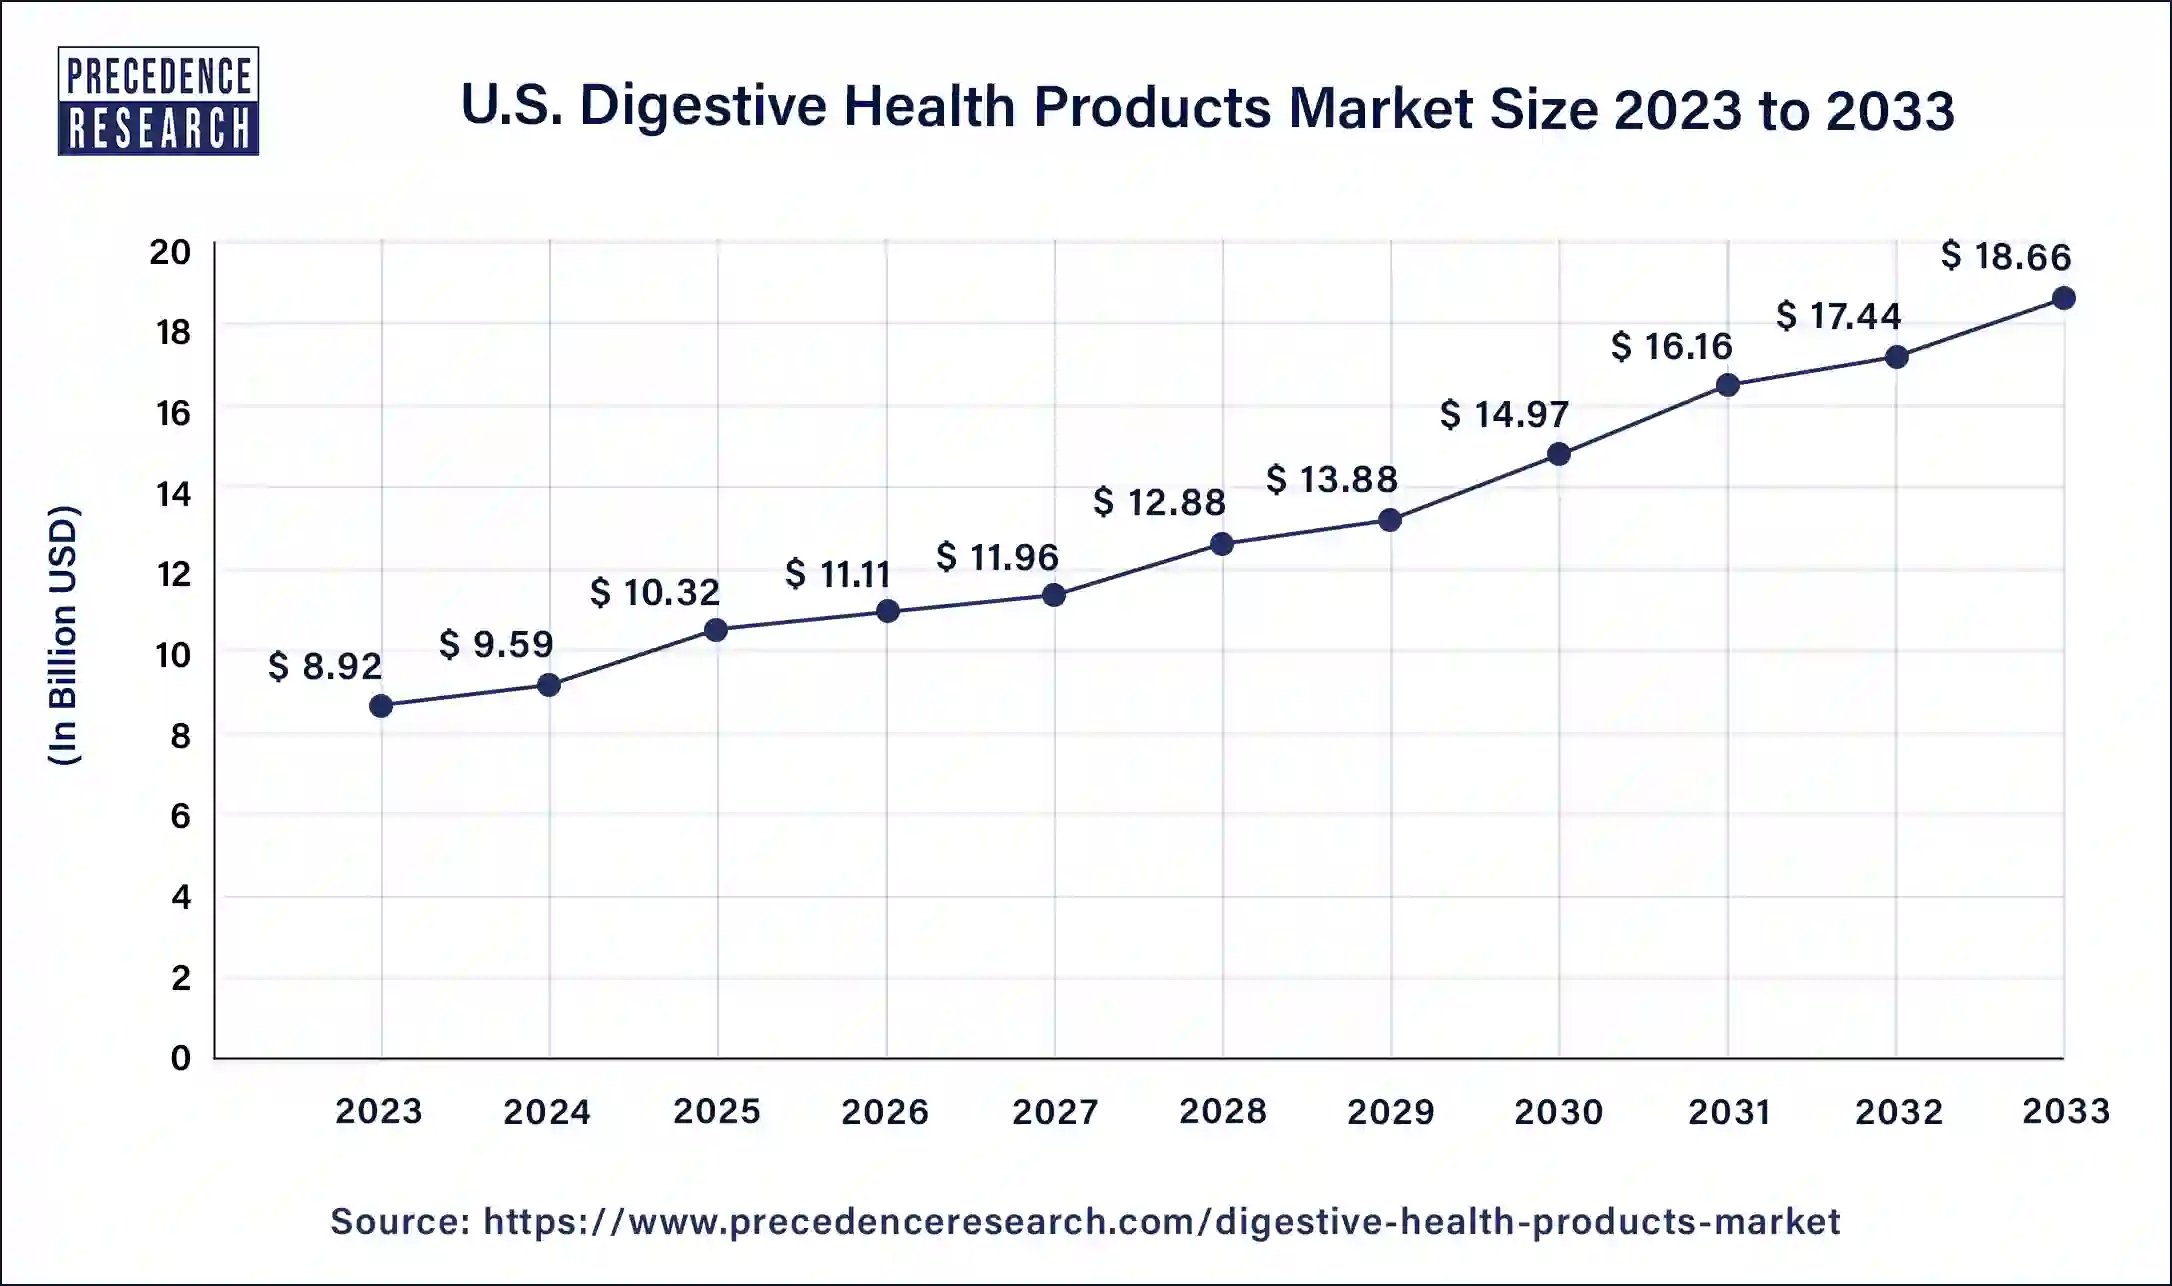 U.S. Digestive Health Products Market Size 2024 to 2033